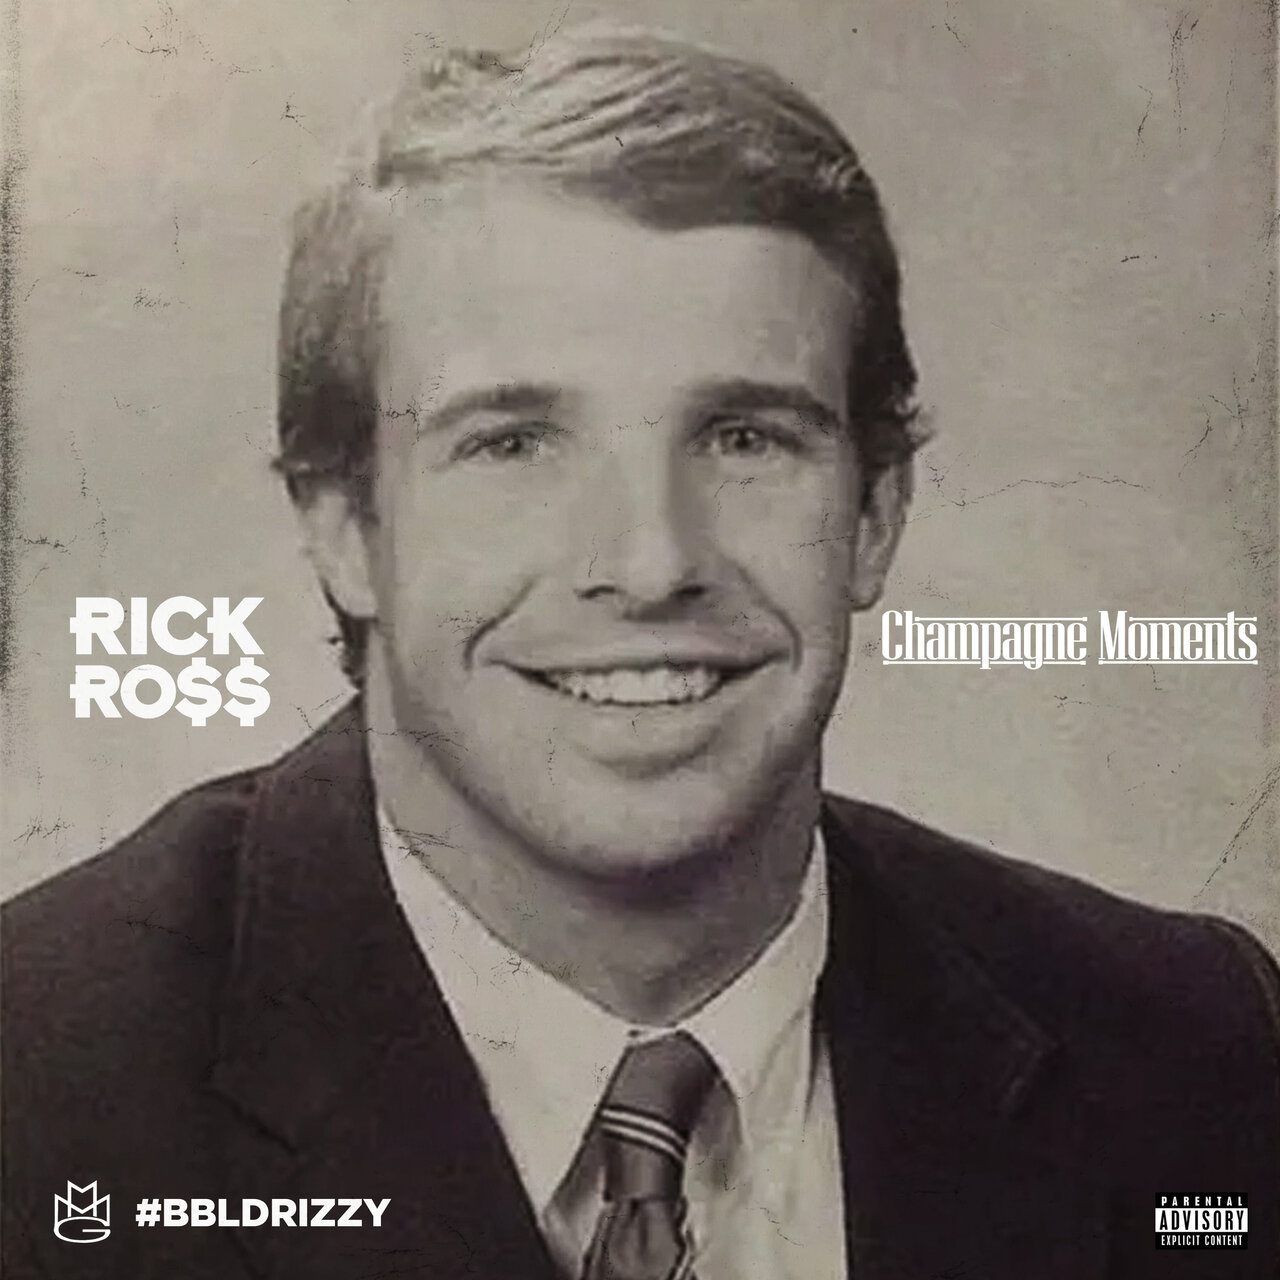 Rick Ross - Champagne Moments (Cover)